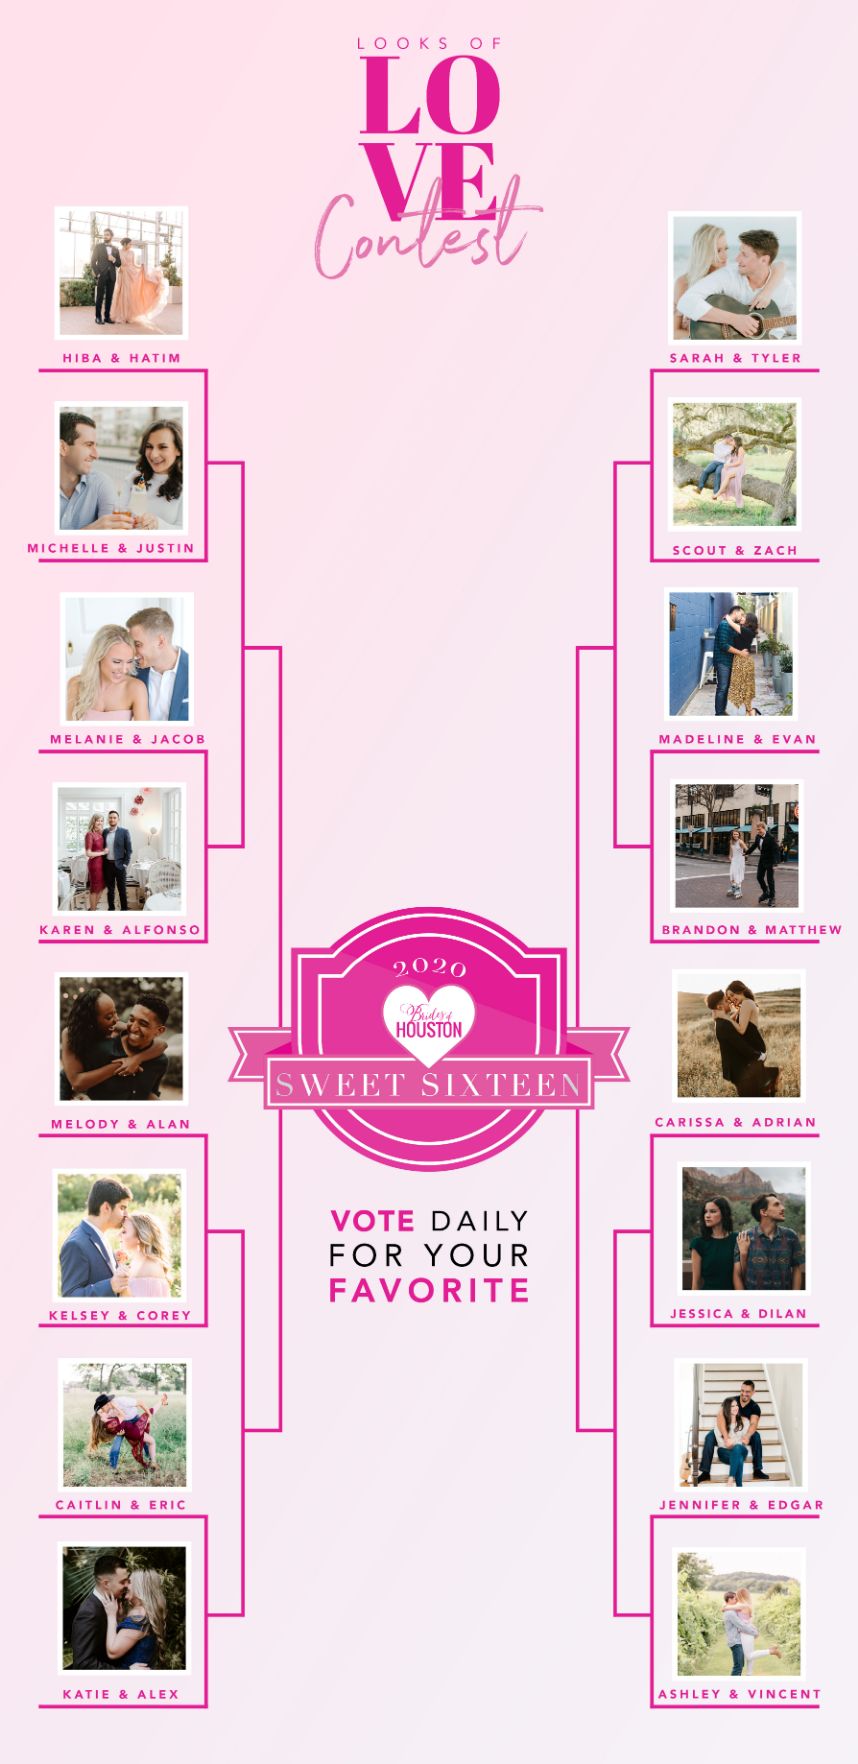 Looks of Love Contest 2020 – Cast your vote for our Sweet 16 Finalists!